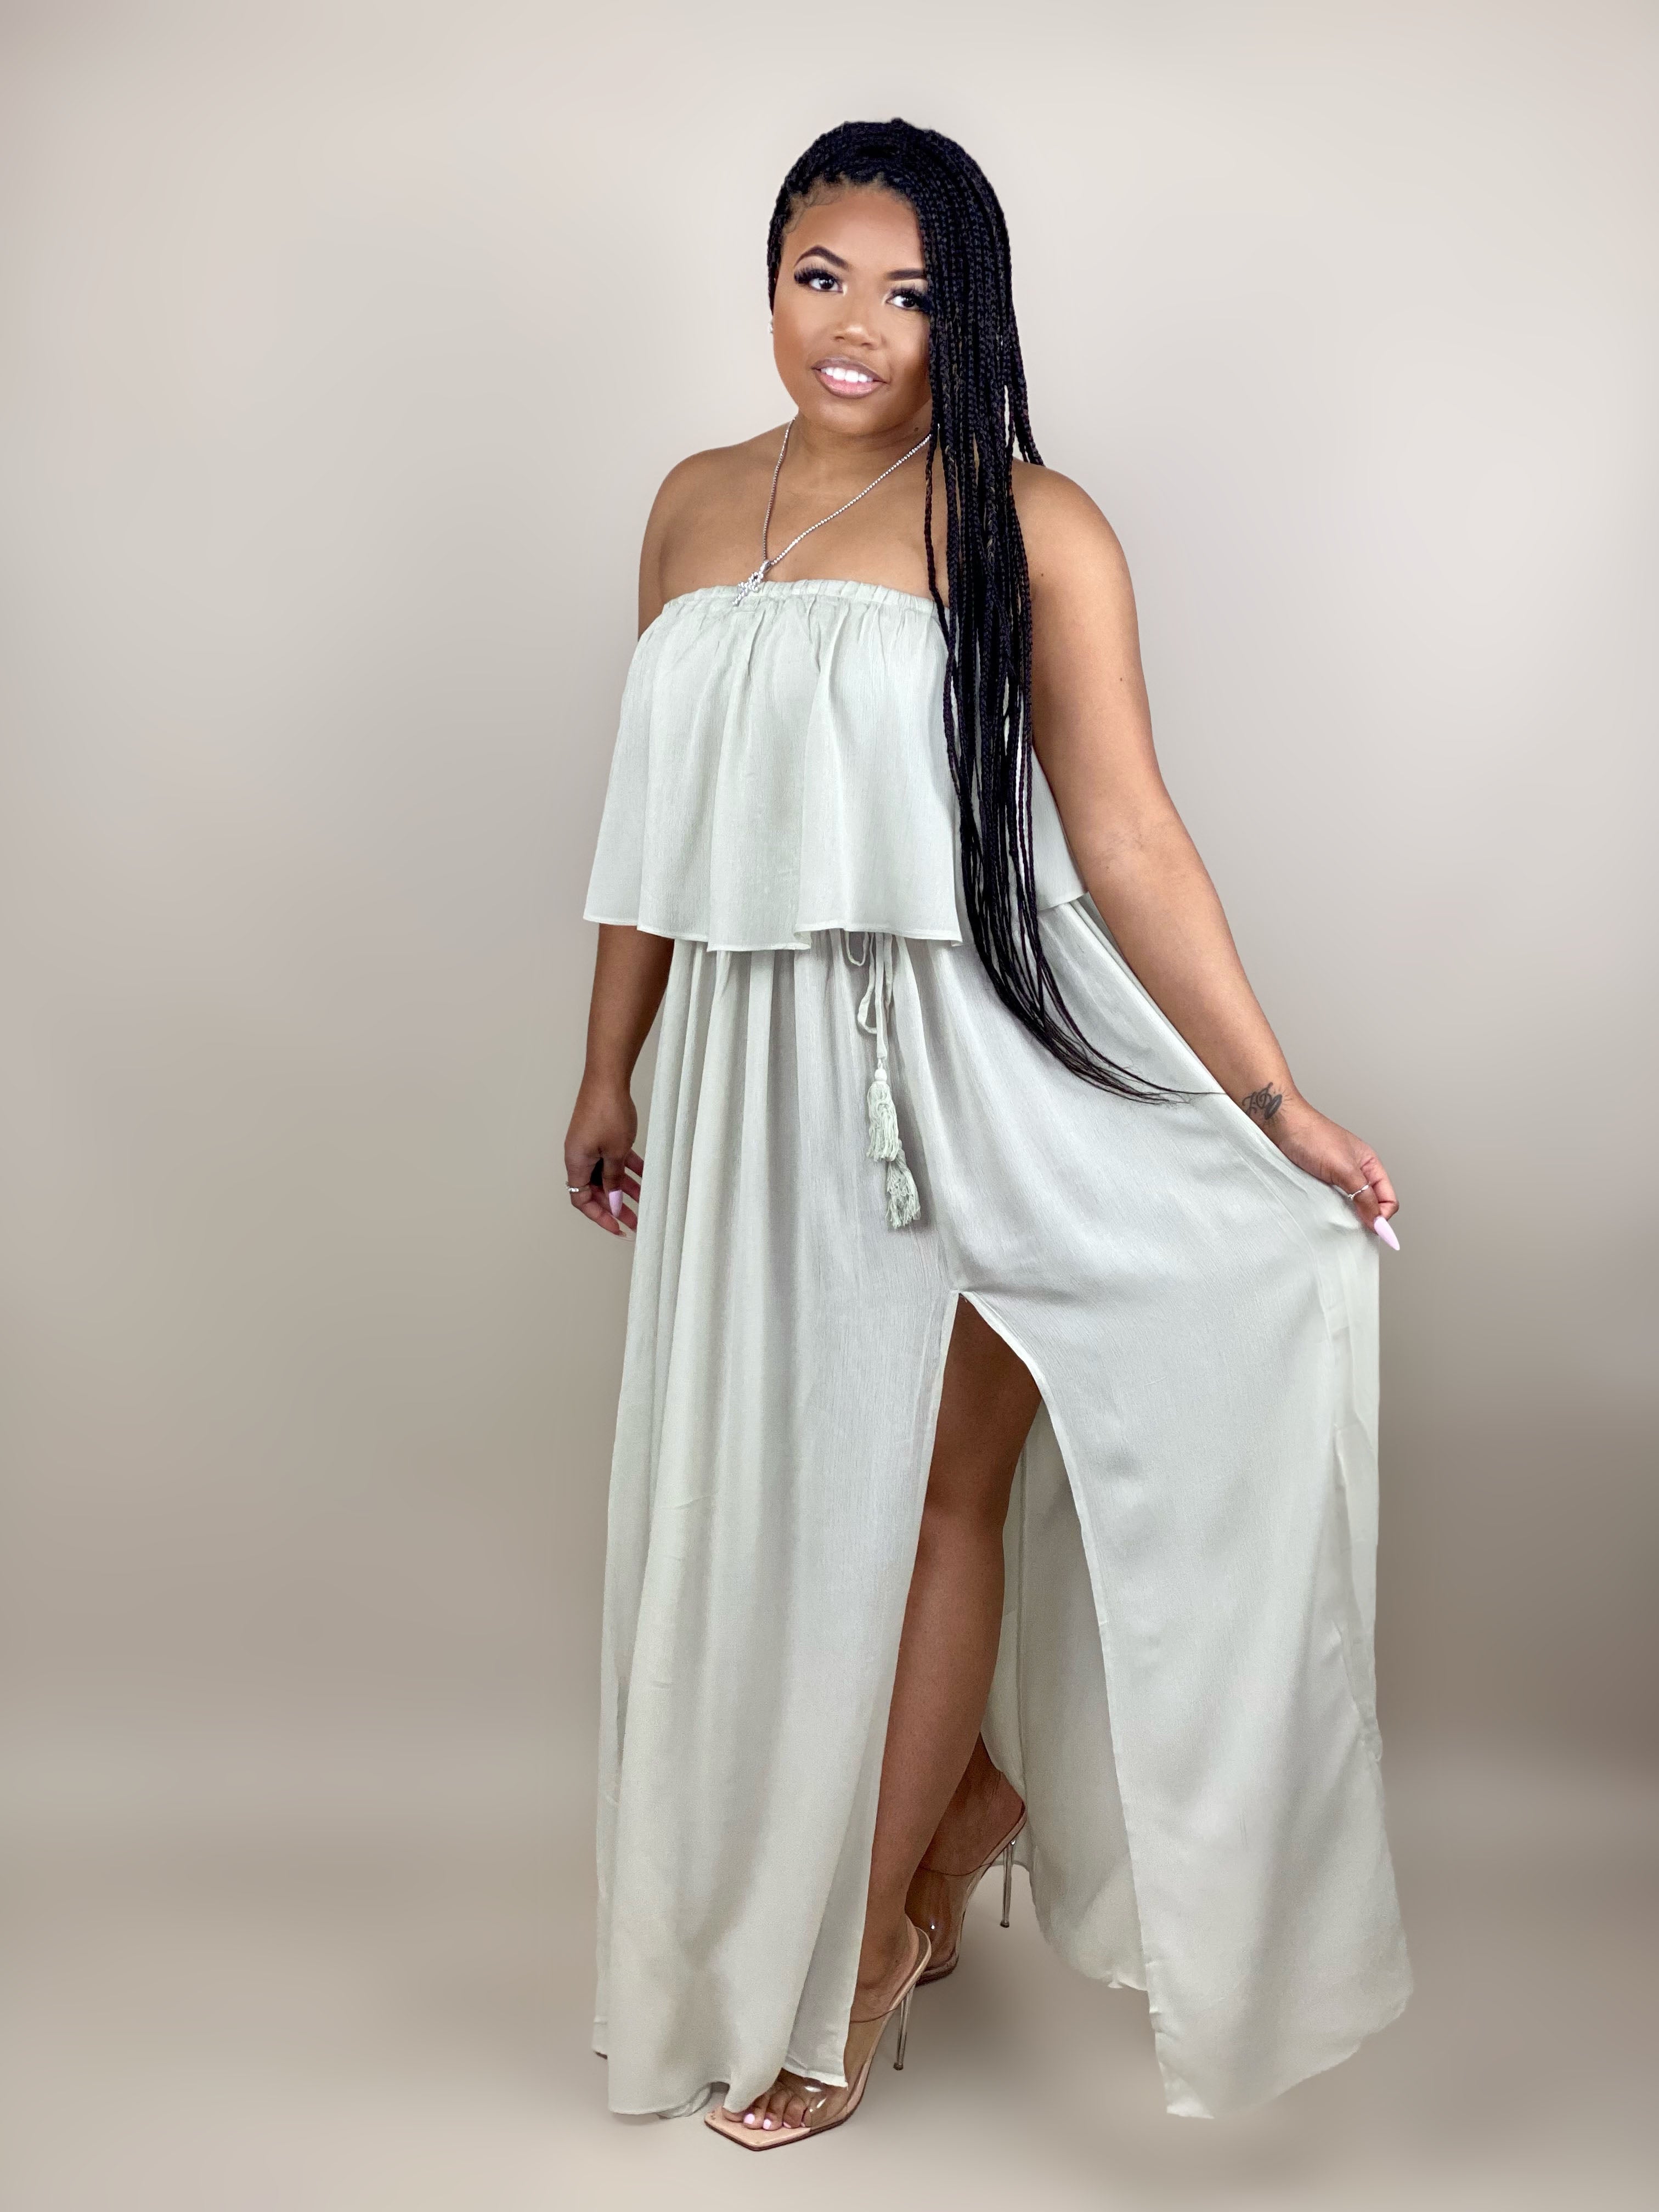 strapless maxi dress with side slit